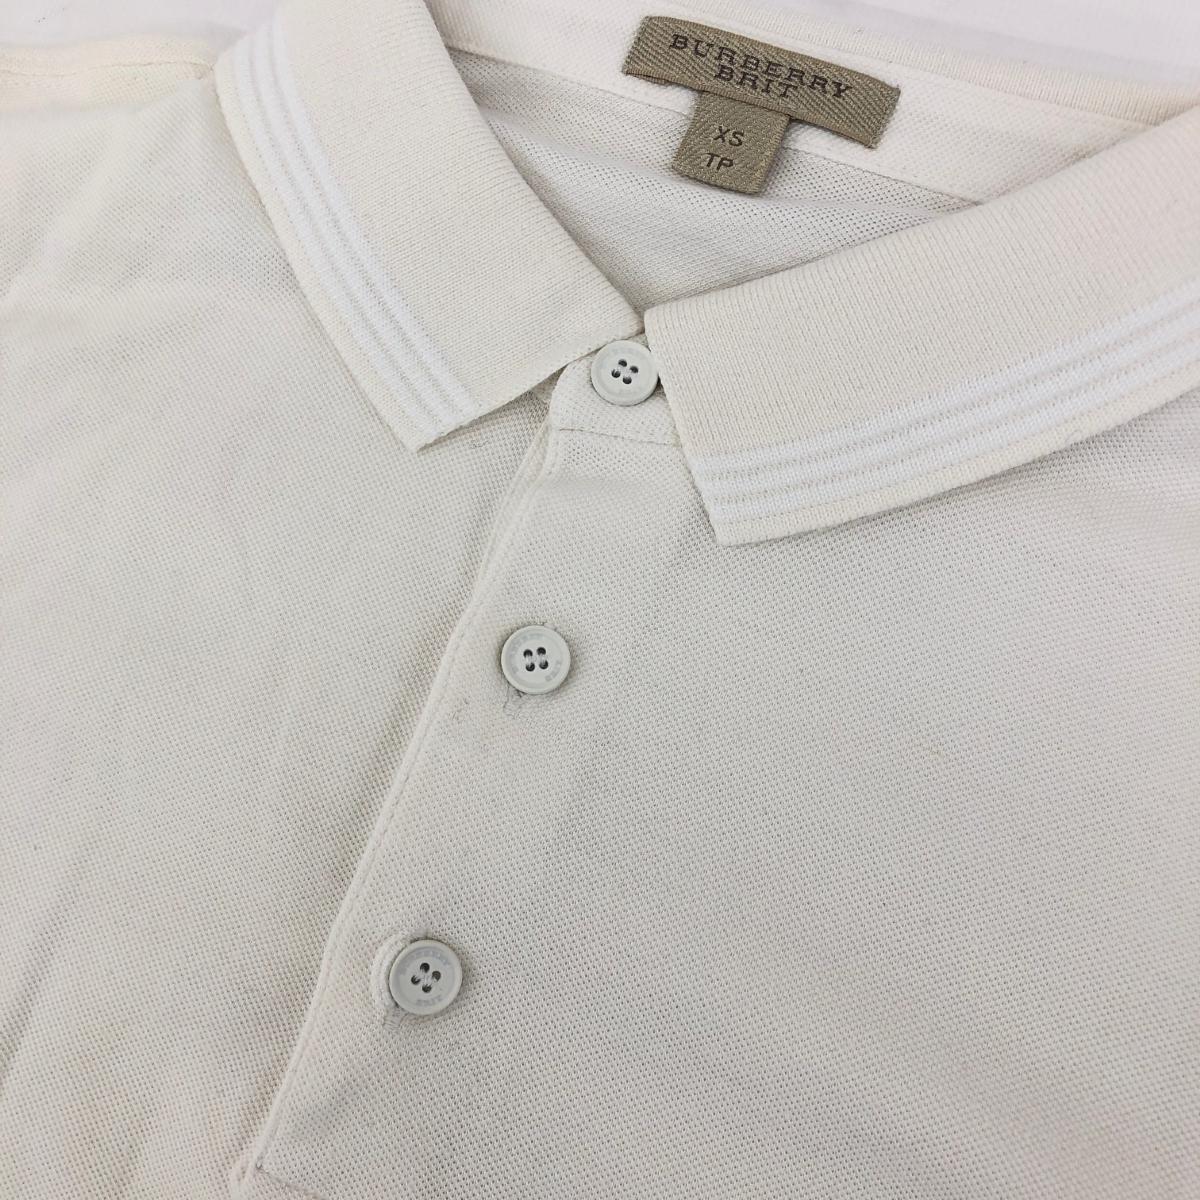 *Burberry Brit Burberry Blit polo-shirt with short sleeves XS size * ivory cotton × silk men's tops 